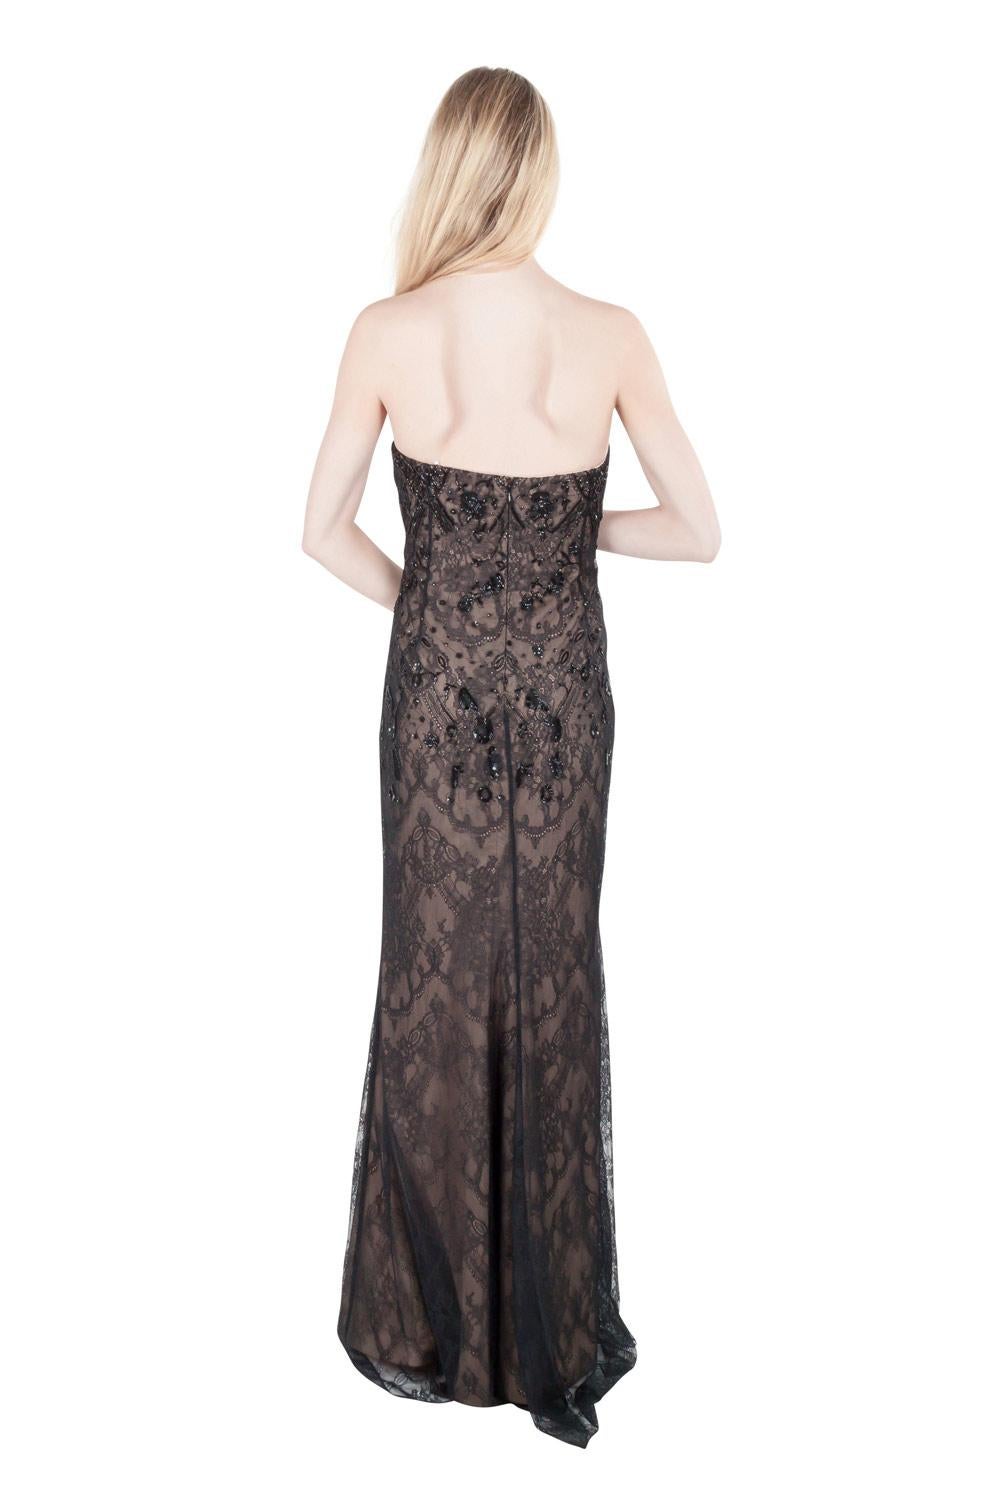 Breathtaking in black, this Marchesa creation is tailored from a fabric blend and is adorned with a lace overlay texture all over. The strapless dress has beautiful embellishments flaunted at the front and back. Opt for smokey eyes, side-swept hair